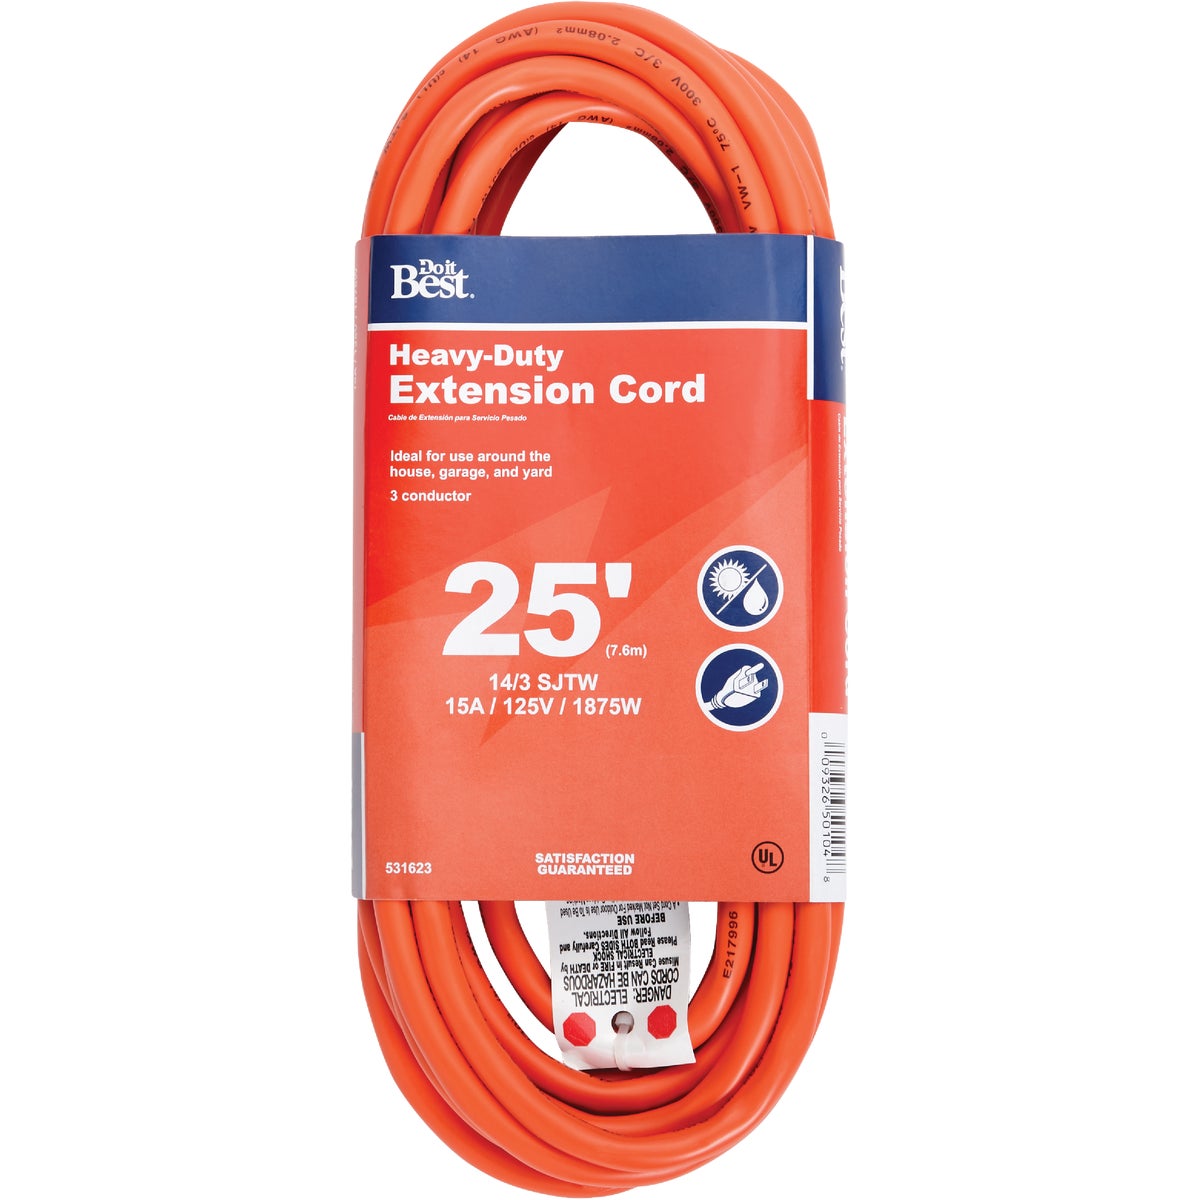 Item 531623, 3 conductor SJTW heavy-duty, all-weather extension cord.